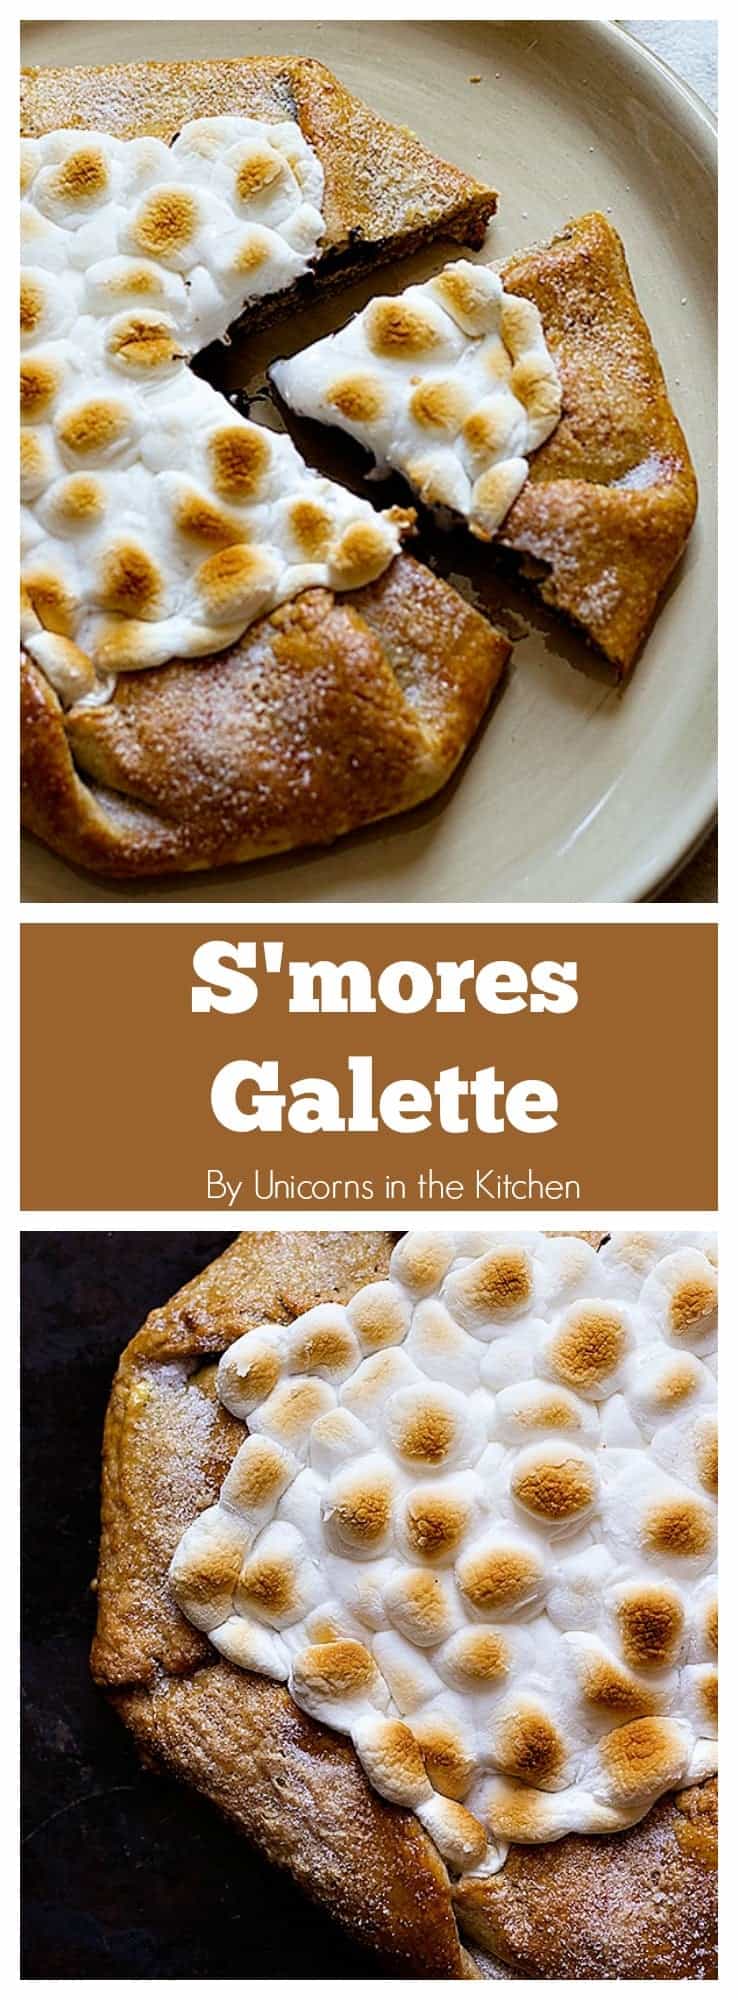 S'mores are delicious in any shape or form. Make this super easy S'mores Galette with graham crackers crust and enjoy a wonderful summer! 